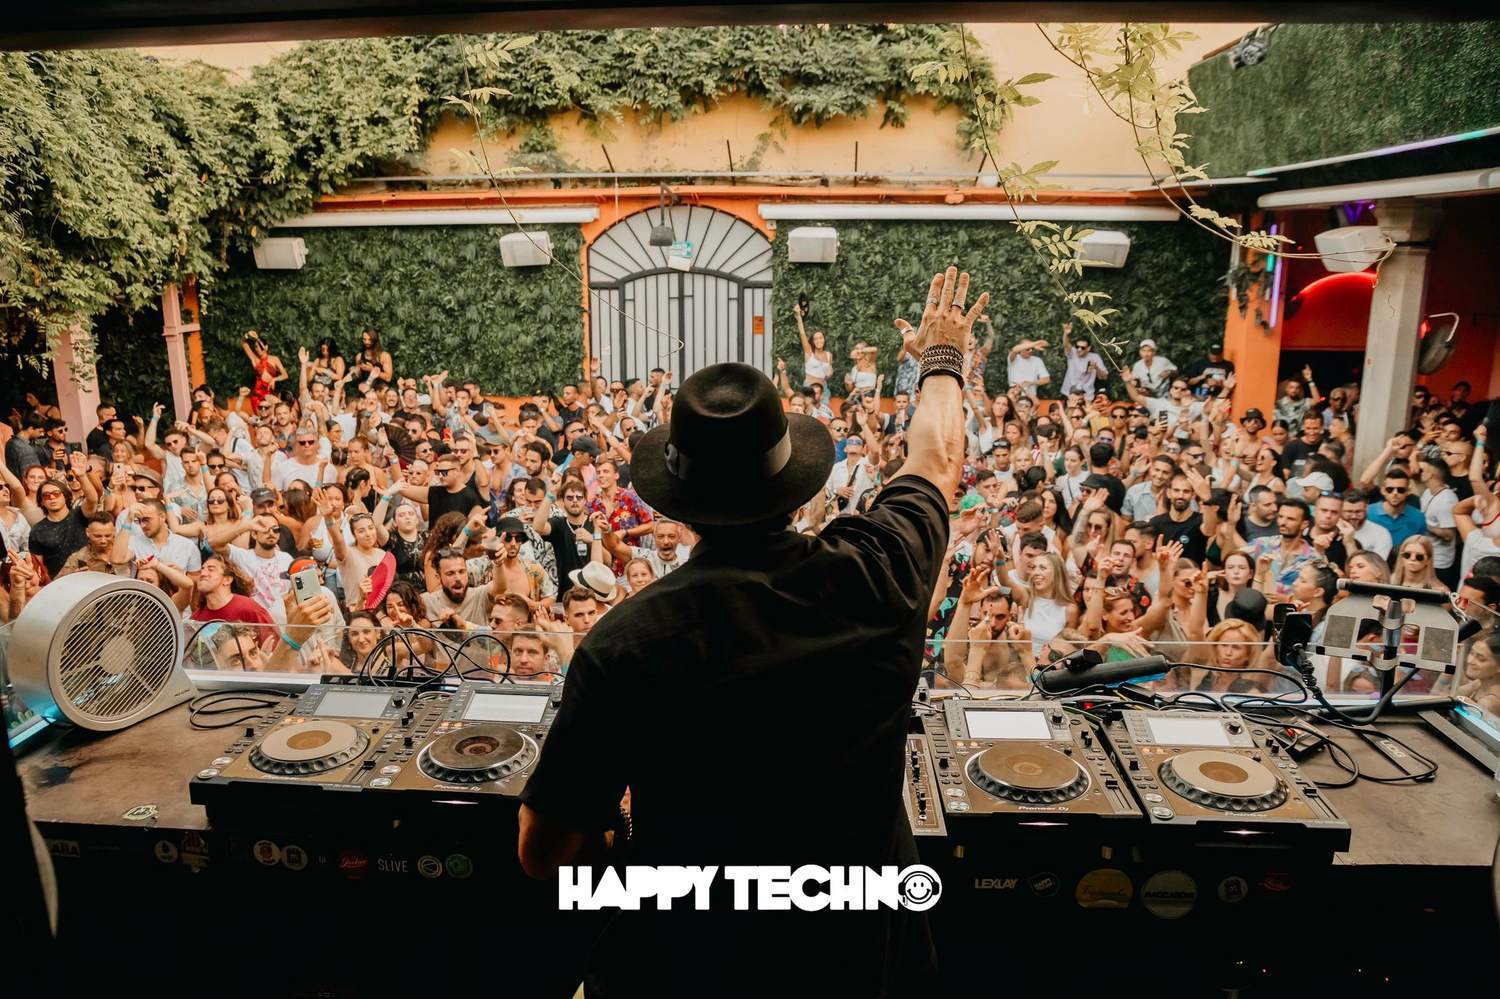 ***SOLD OUT*** HappyTechno Open Air / Daytime Air at La Terrrazza - フライヤー裏